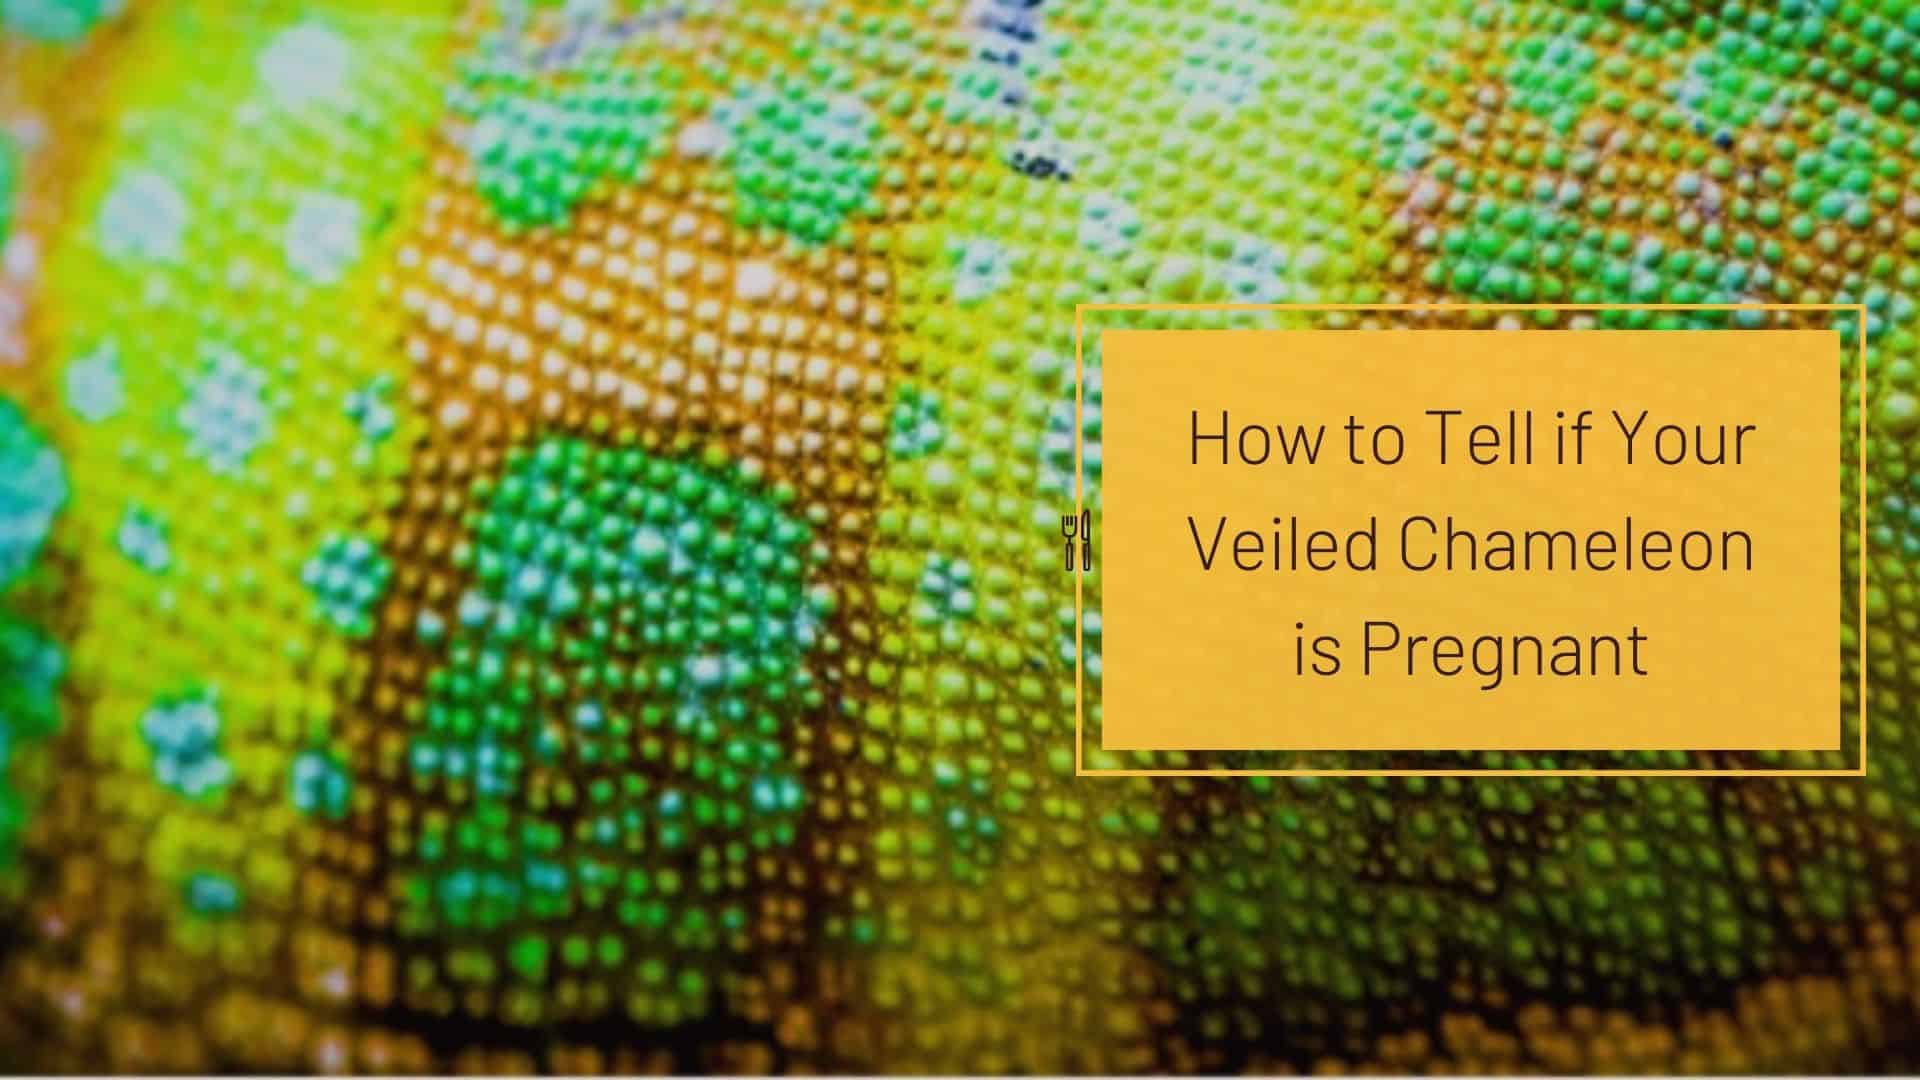 how to tell if veiled chameleon is pregnant